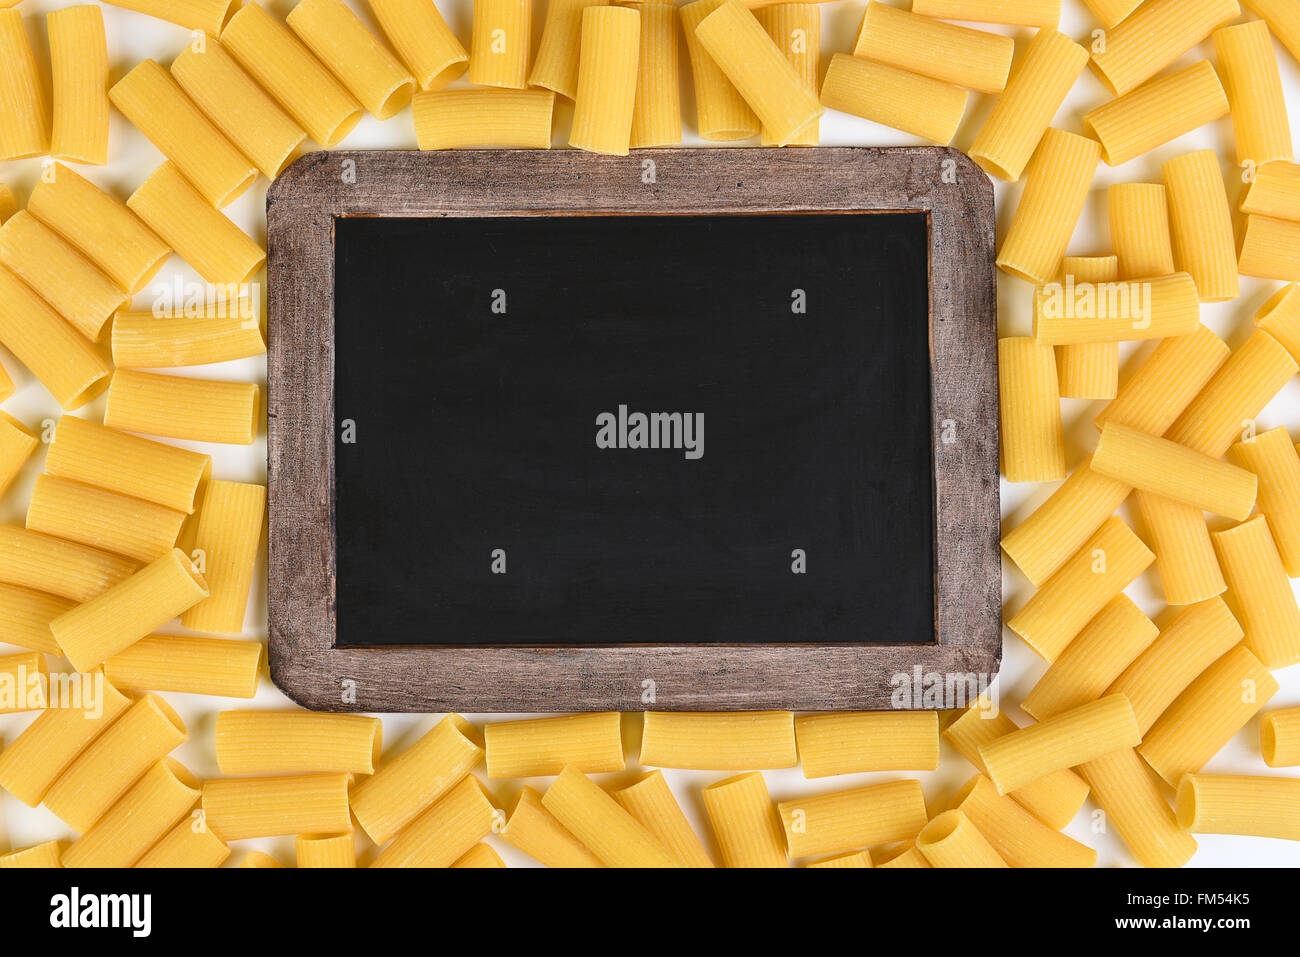 Chalkboard surrounded by rigatoni pasta. Top vies filling the frame. Stock Photo